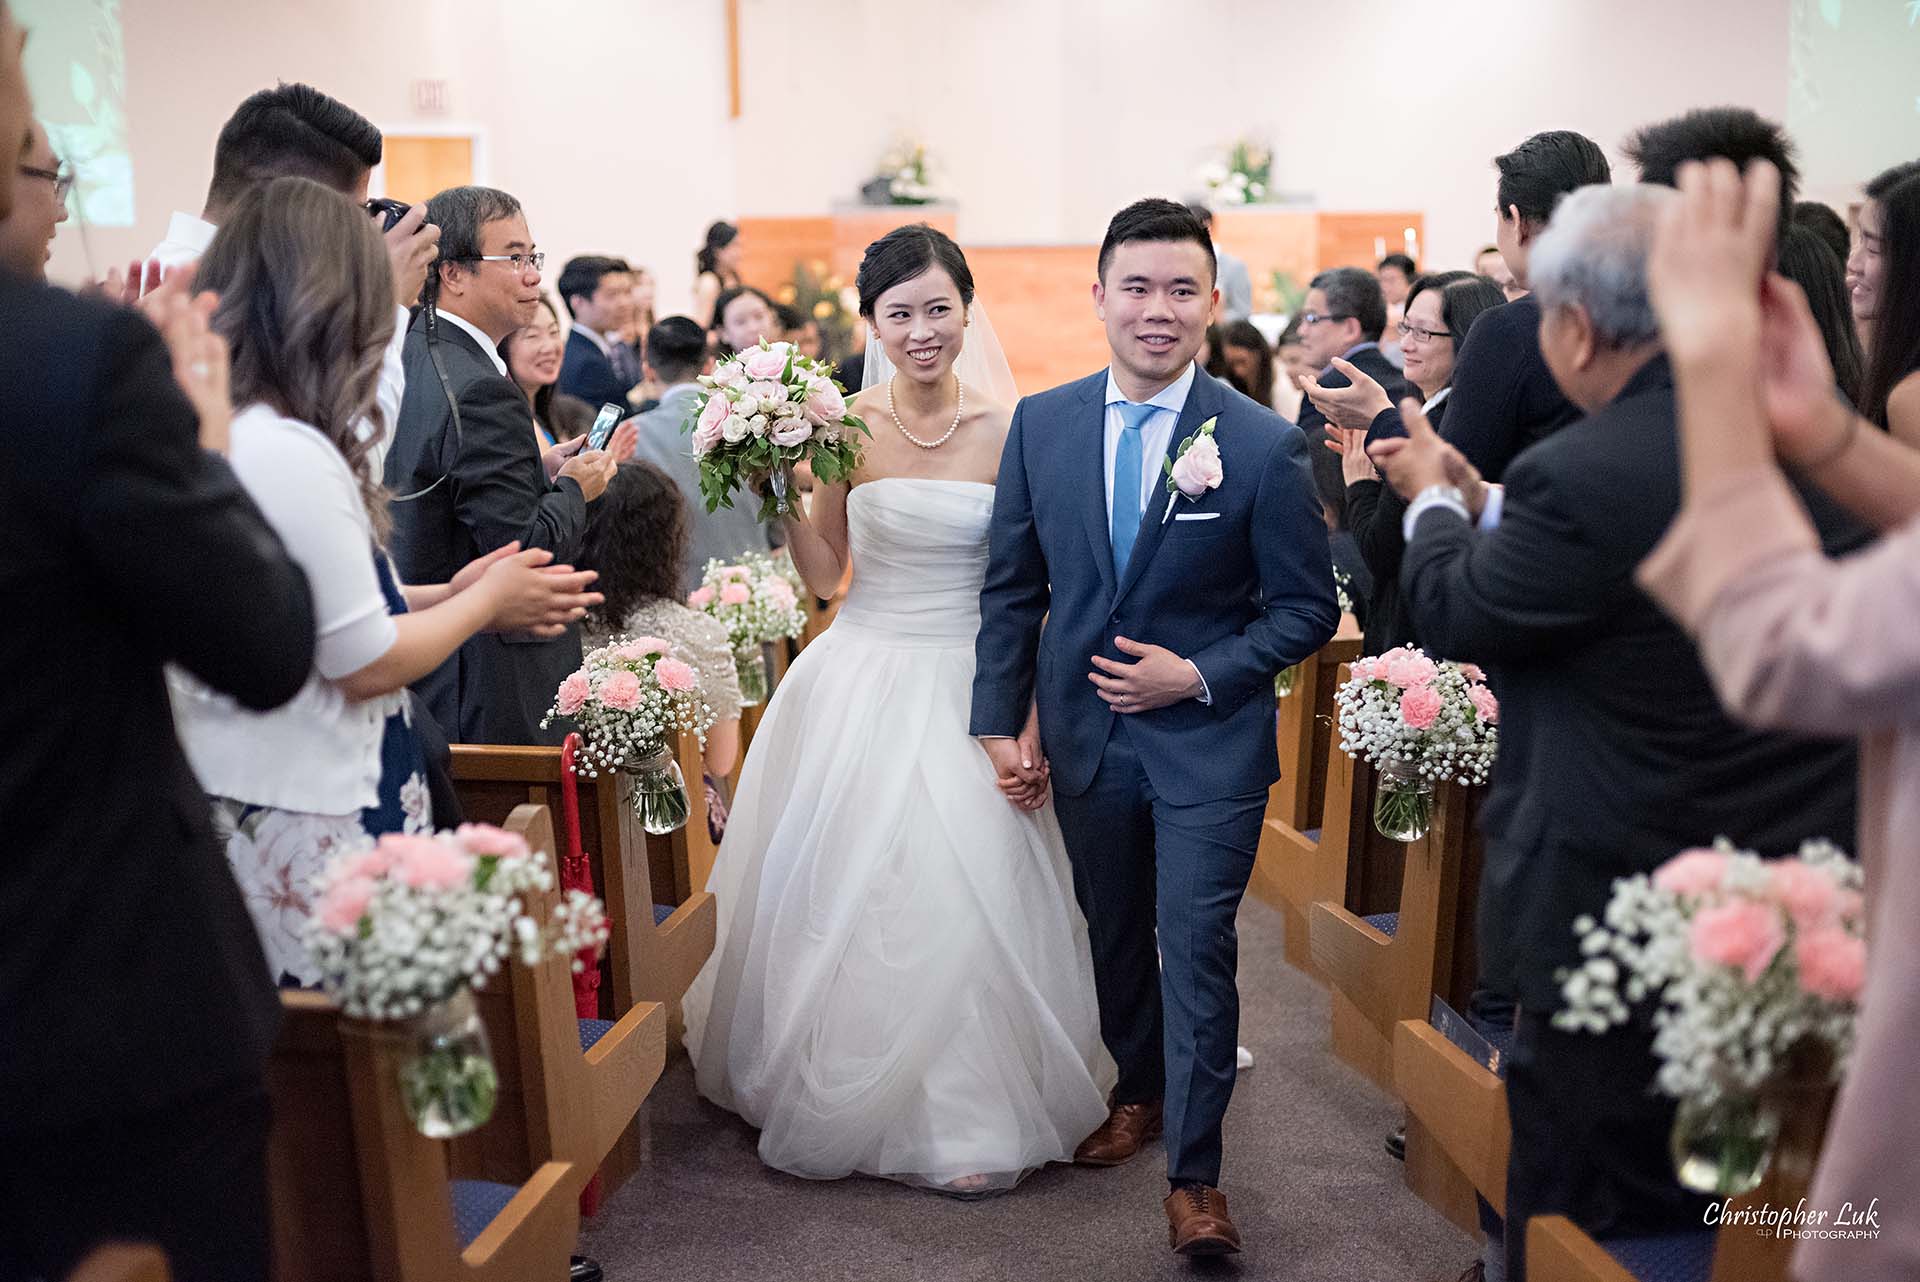 Christopher Luk Toronto Wedding Photographer Chinese Gospel Church Scarborough Ceremony Recessional Bride Groom Walking Aisle Out Together